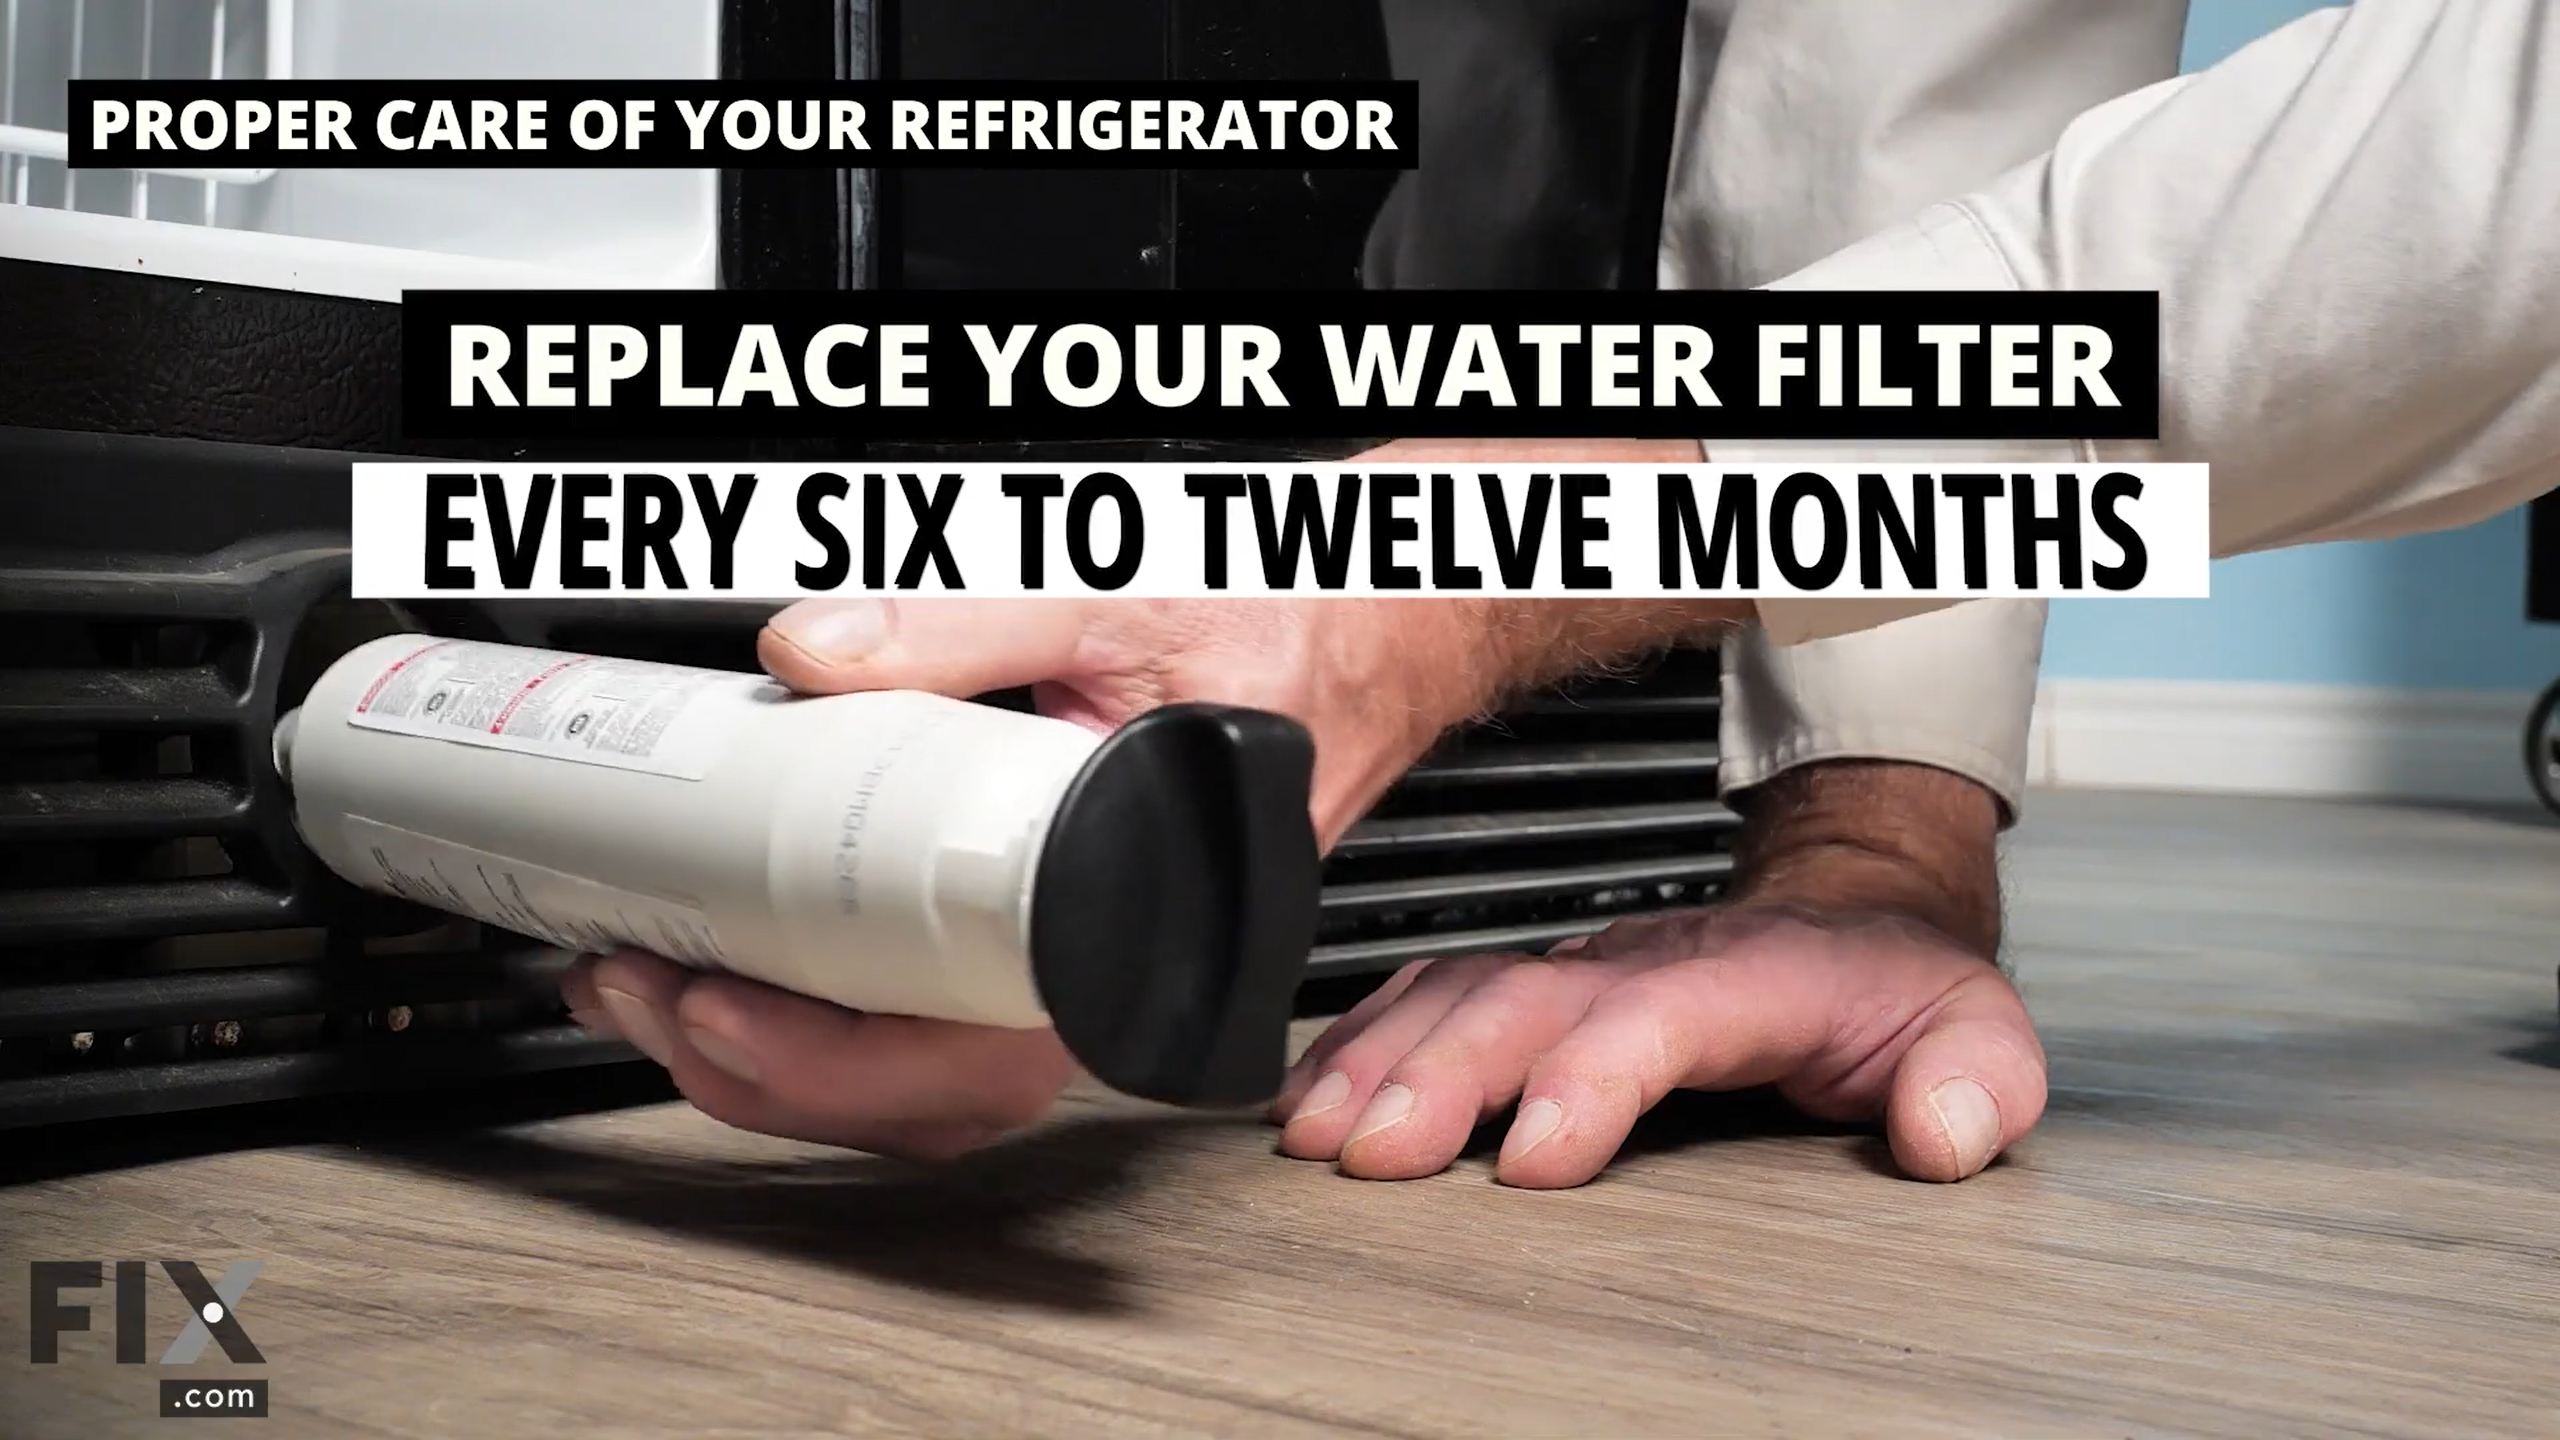 Water filter being removed from bottom of refrigerator.